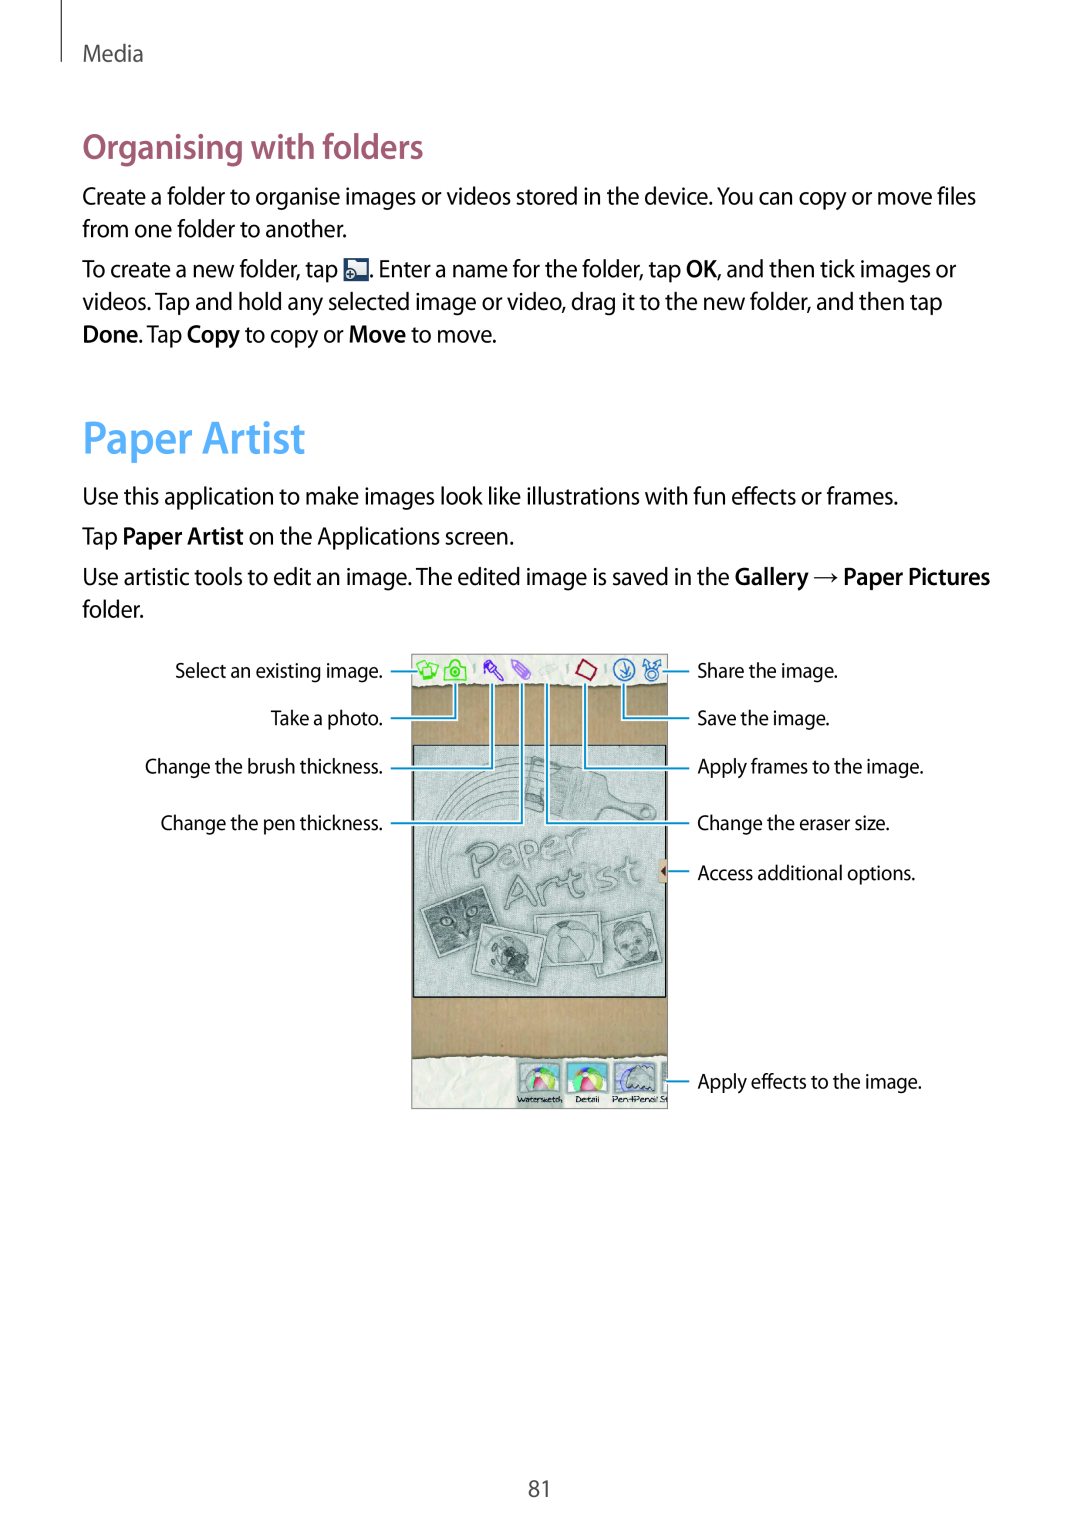 Samsung GT-I9305RWDDBT manual Paper Artist, Organising with folders, Media, Select an existing image, Share the image 